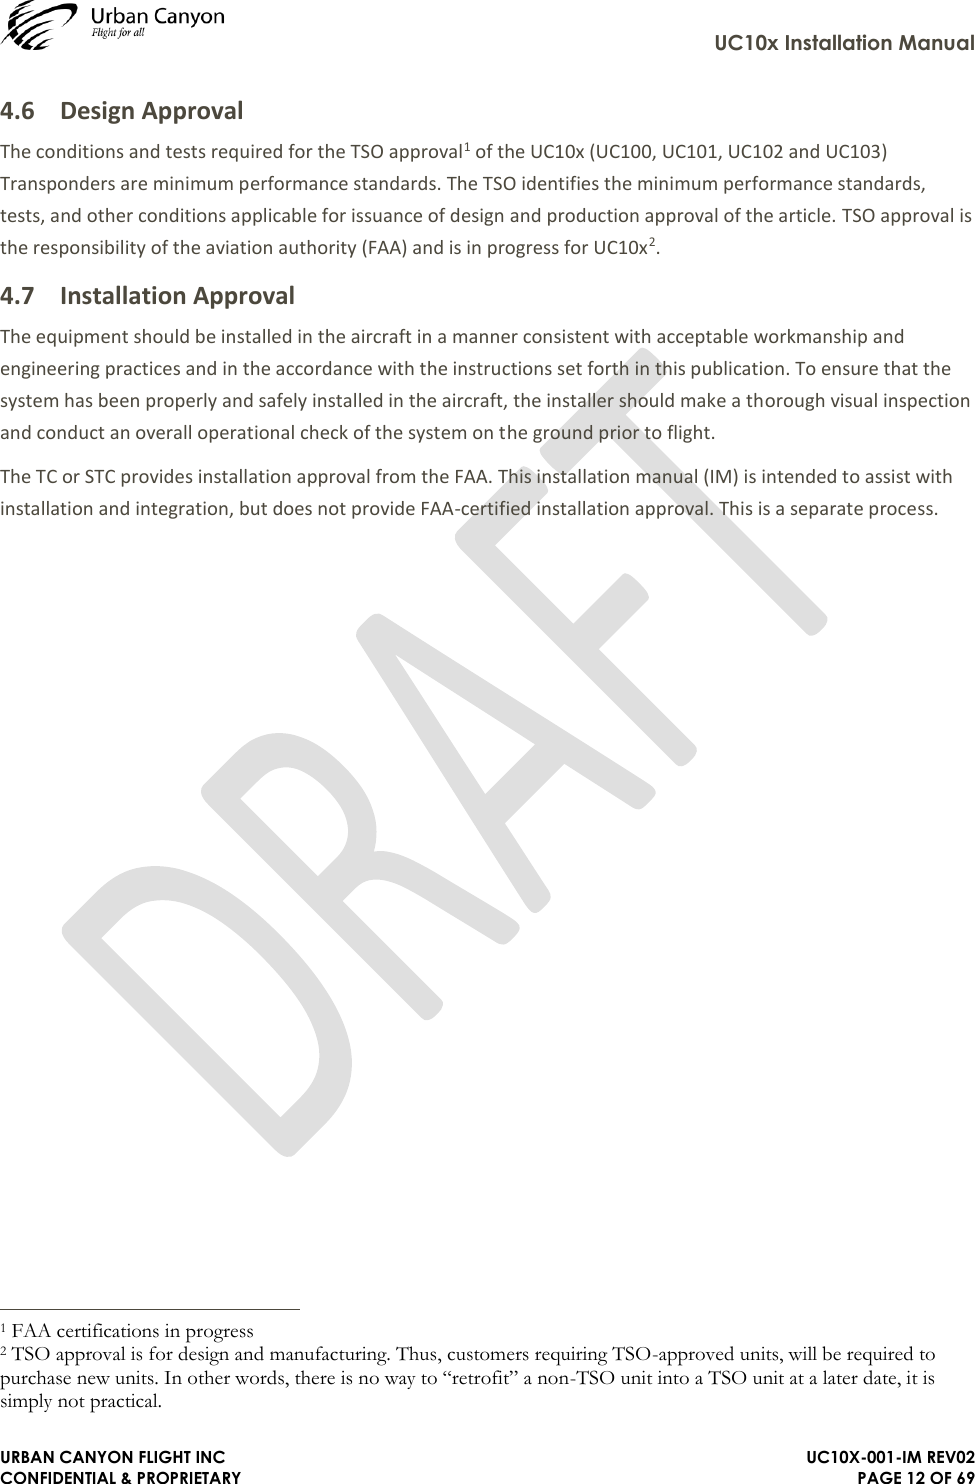     UC10x Installation Manual  URBAN CANYON FLIGHT INC   UC10X-001-IM REV02 CONFIDENTIAL &amp; PROPRIETARY PAGE 12 OF 69 4.6 Design Approval The conditions and tests required for the TSO approval1 of the UC10x (UC100, UC101, UC102 and UC103) Transponders are minimum performance standards. The TSO identifies the minimum performance standards, tests, and other conditions applicable for issuance of design and production approval of the article. TSO approval is the responsibility of the aviation authority (FAA) and is in progress for UC10x2. 4.7 Installation Approval The equipment should be installed in the aircraft in a manner consistent with acceptable workmanship and engineering practices and in the accordance with the instructions set forth in this publication. To ensure that the system has been properly and safely installed in the aircraft, the installer should make a thorough visual inspection and conduct an overall operational check of the system on the ground prior to flight.  The TC or STC provides installation approval from the FAA. This installation manual (IM) is intended to assist with installation and integration, but does not provide FAA-certified installation approval. This is a separate process.                                                                  1 FAA certifications in progress 2 TSO approval is for design and manufacturing. Thus, customers requiring TSO-approved units, will be required to purchase new units. In other words, there is no way to “retrofit” a non-TSO unit into a TSO unit at a later date, it is simply not practical.  